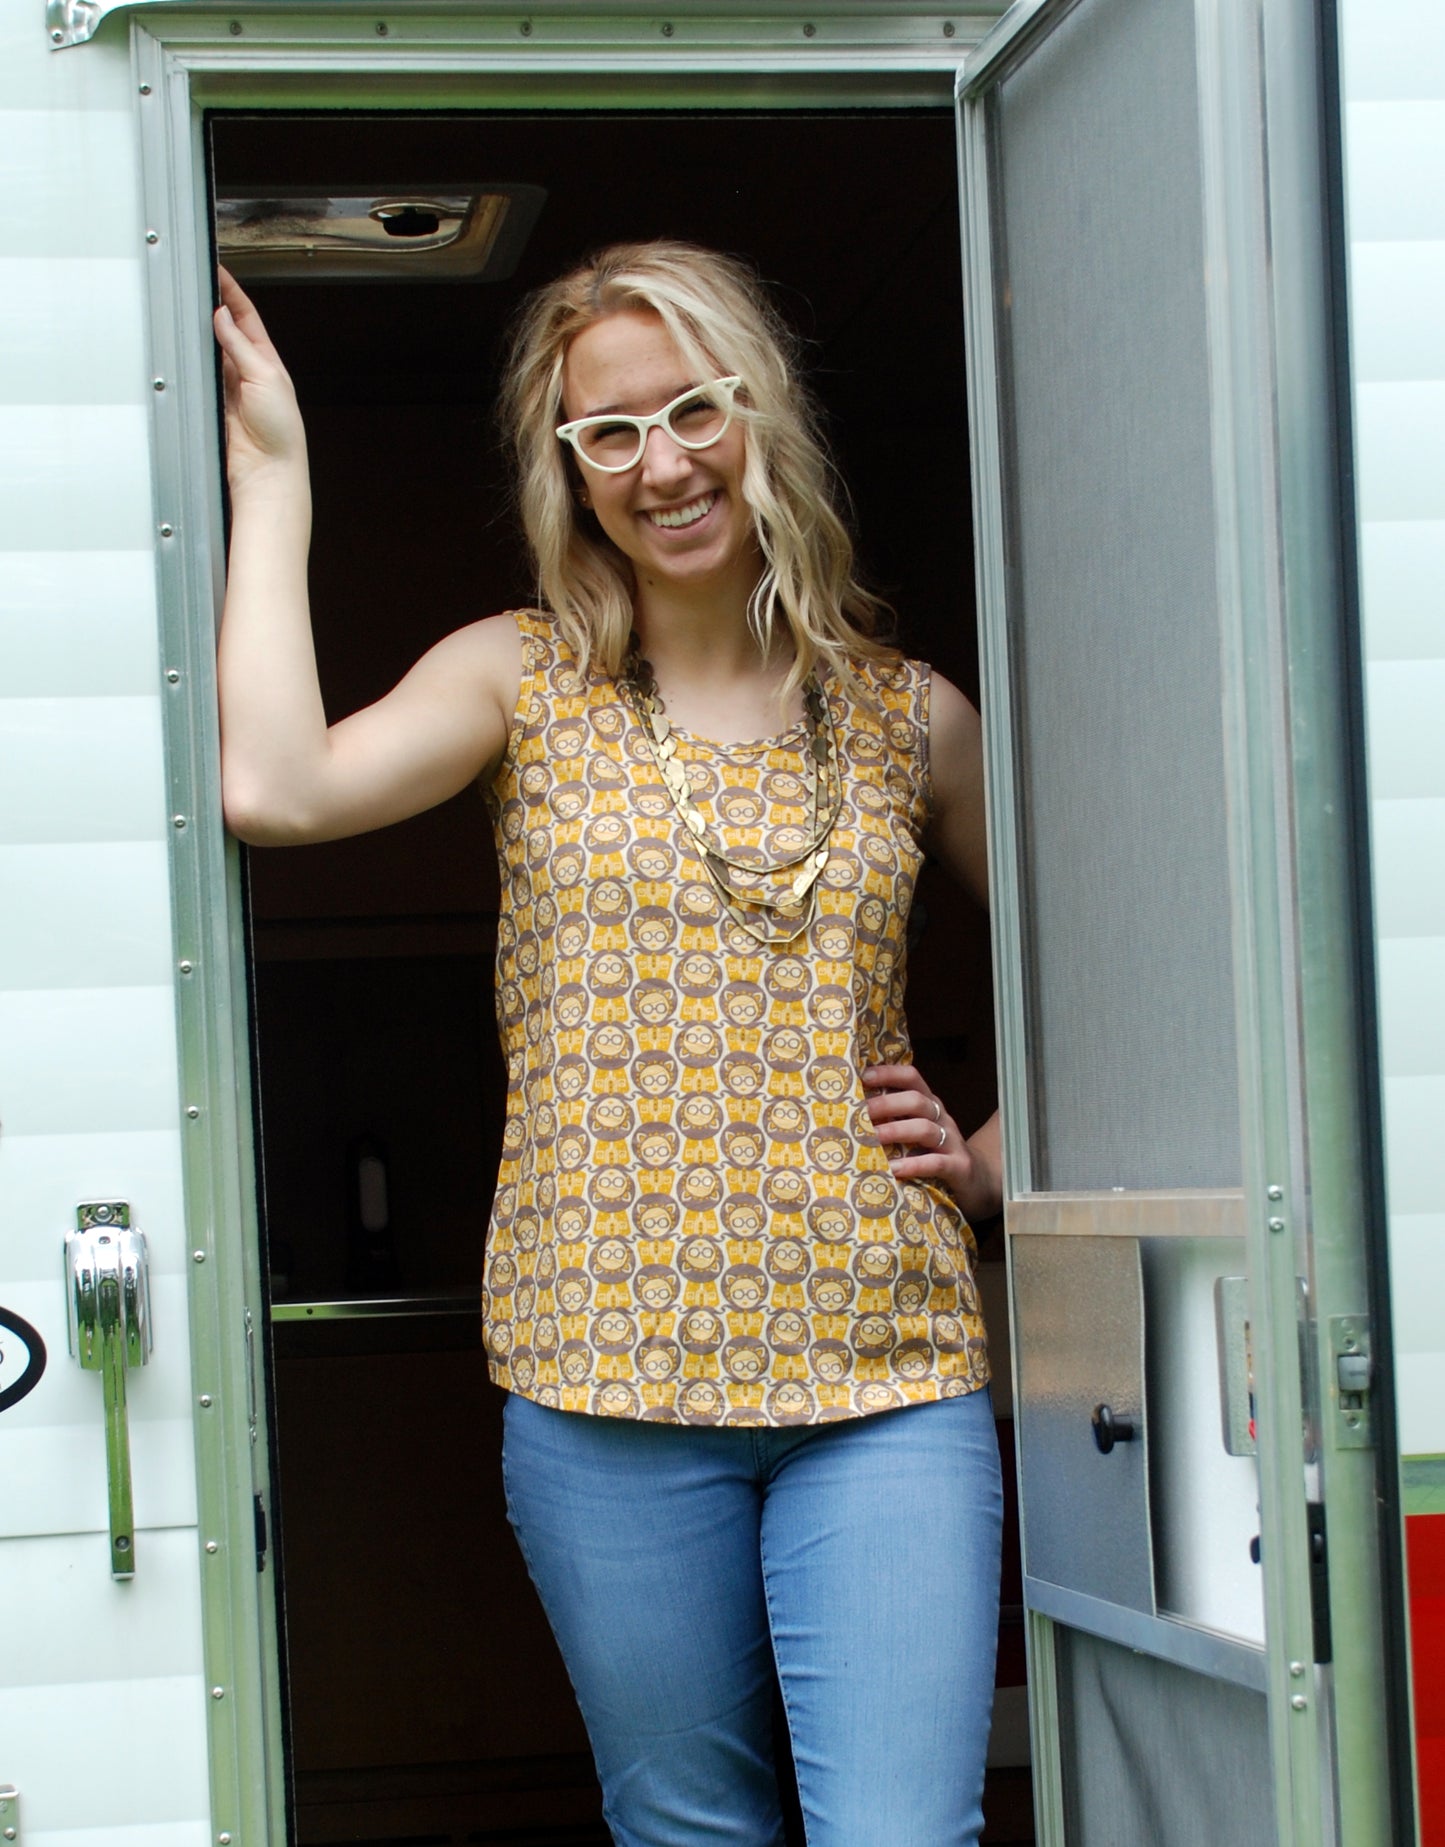 Cute girl wearing glasses and sleeveless yellow and grey girl print top, standing in the door of a camper